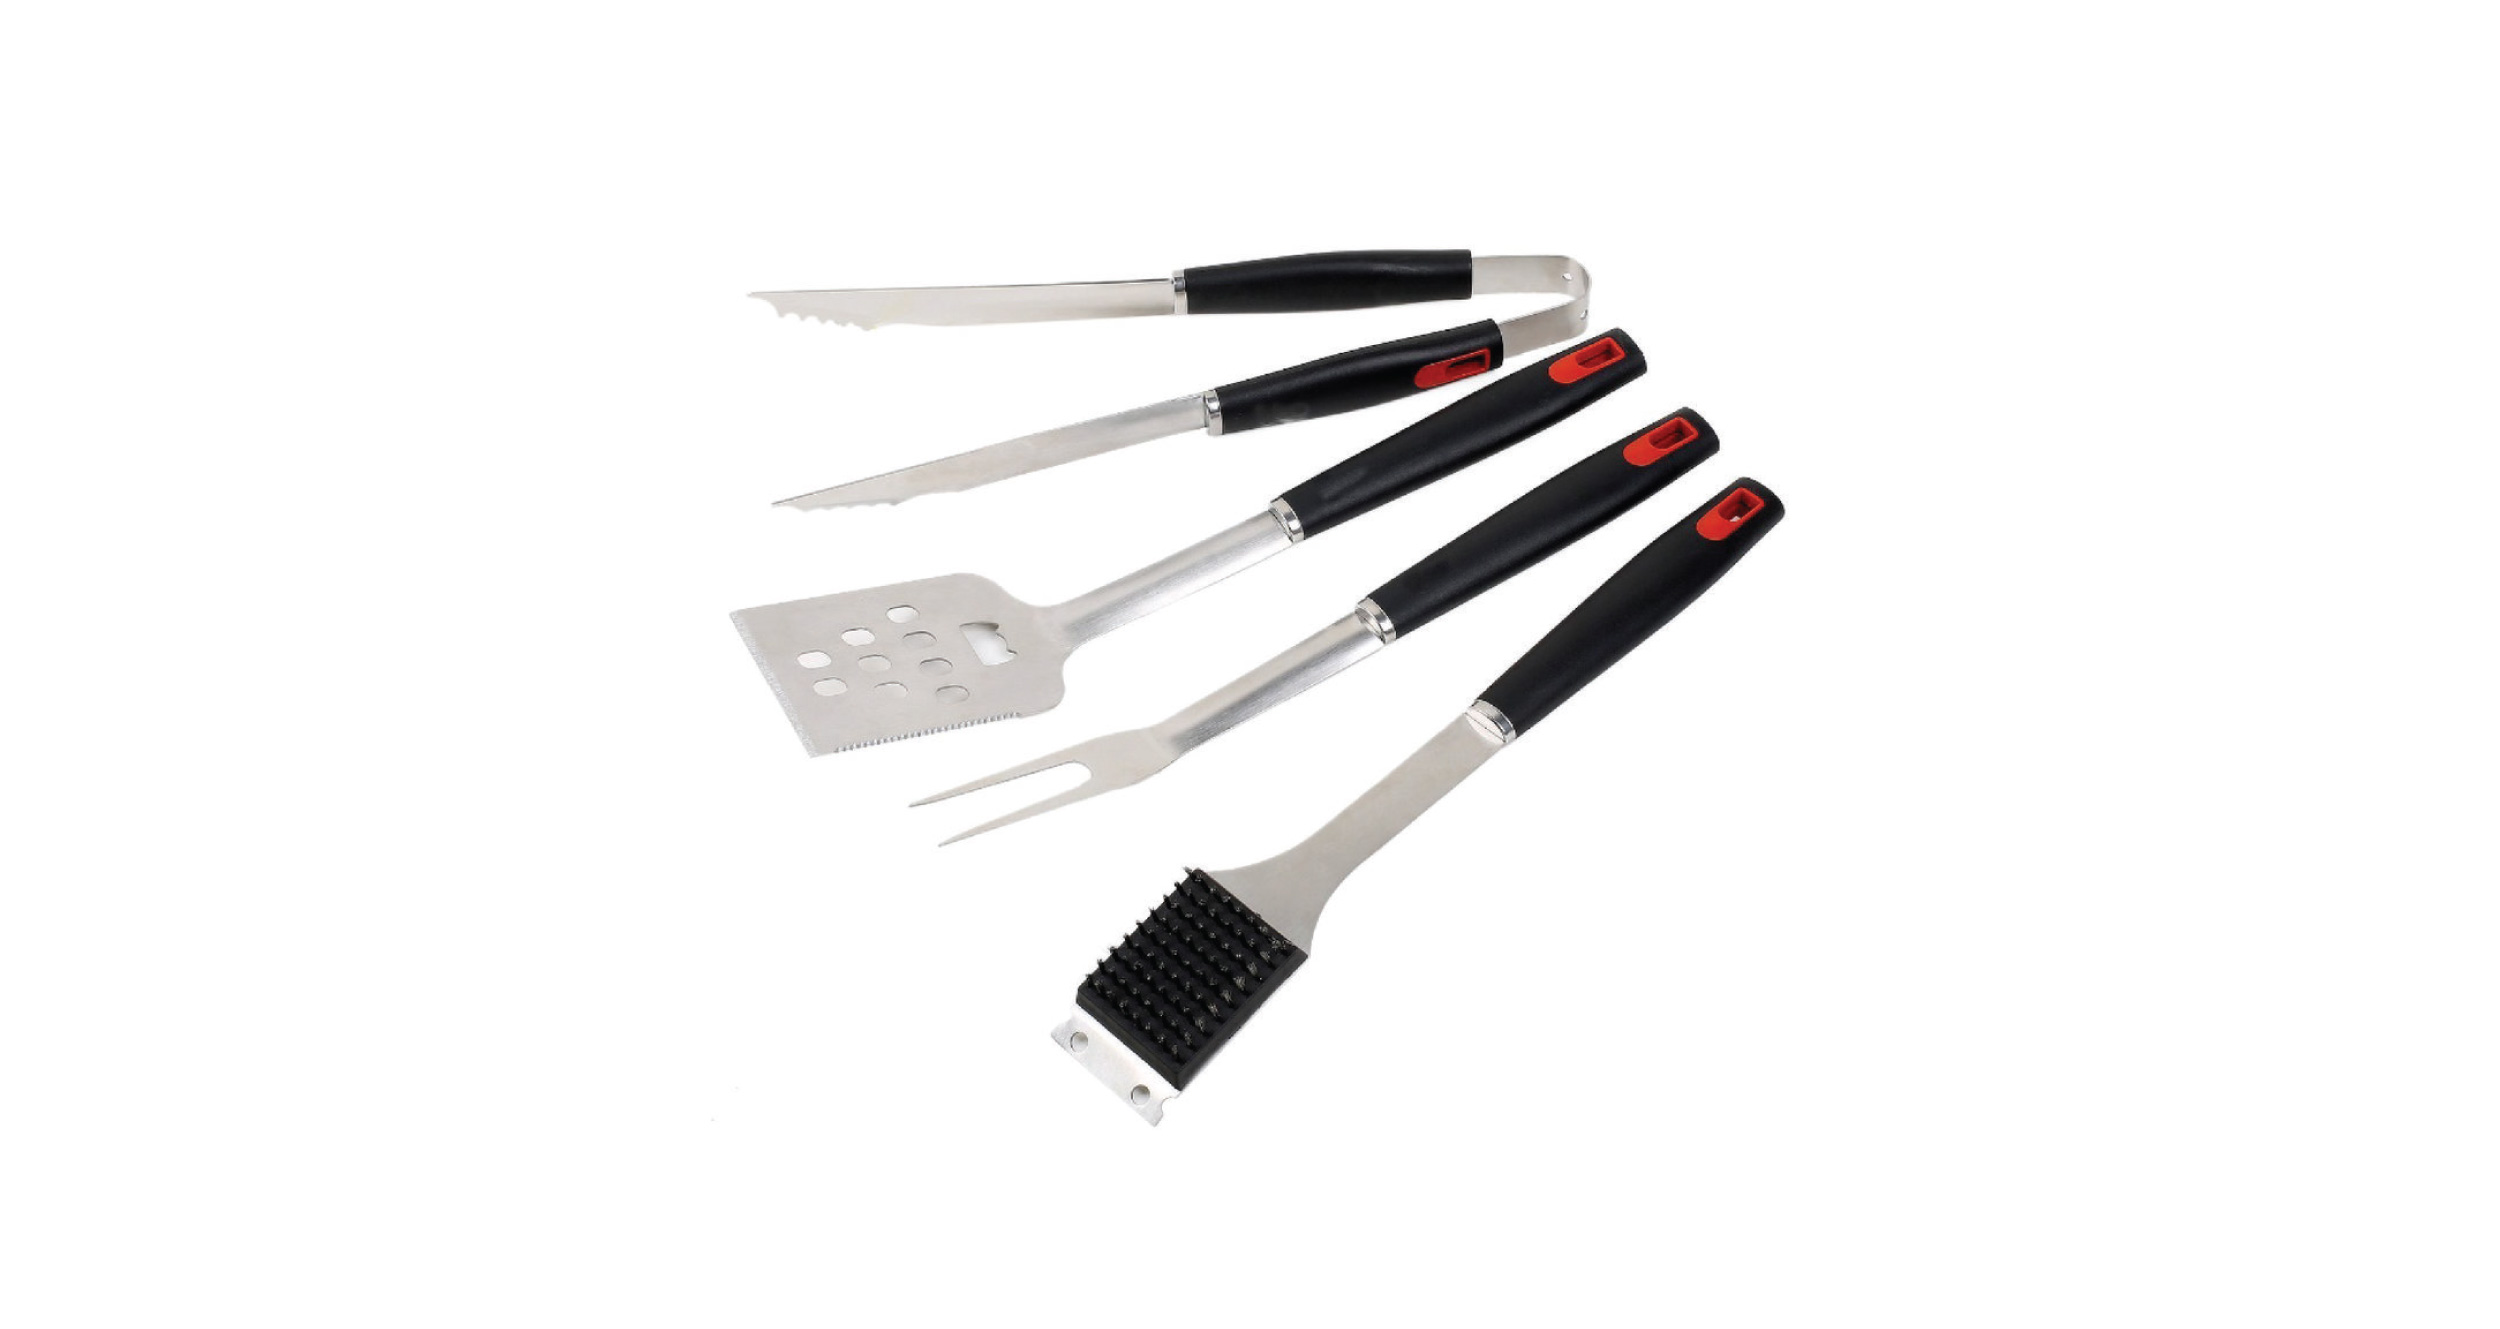 BBQGuys Signature 4 Piece Stainless Steel with Wooden Handles Tool Set